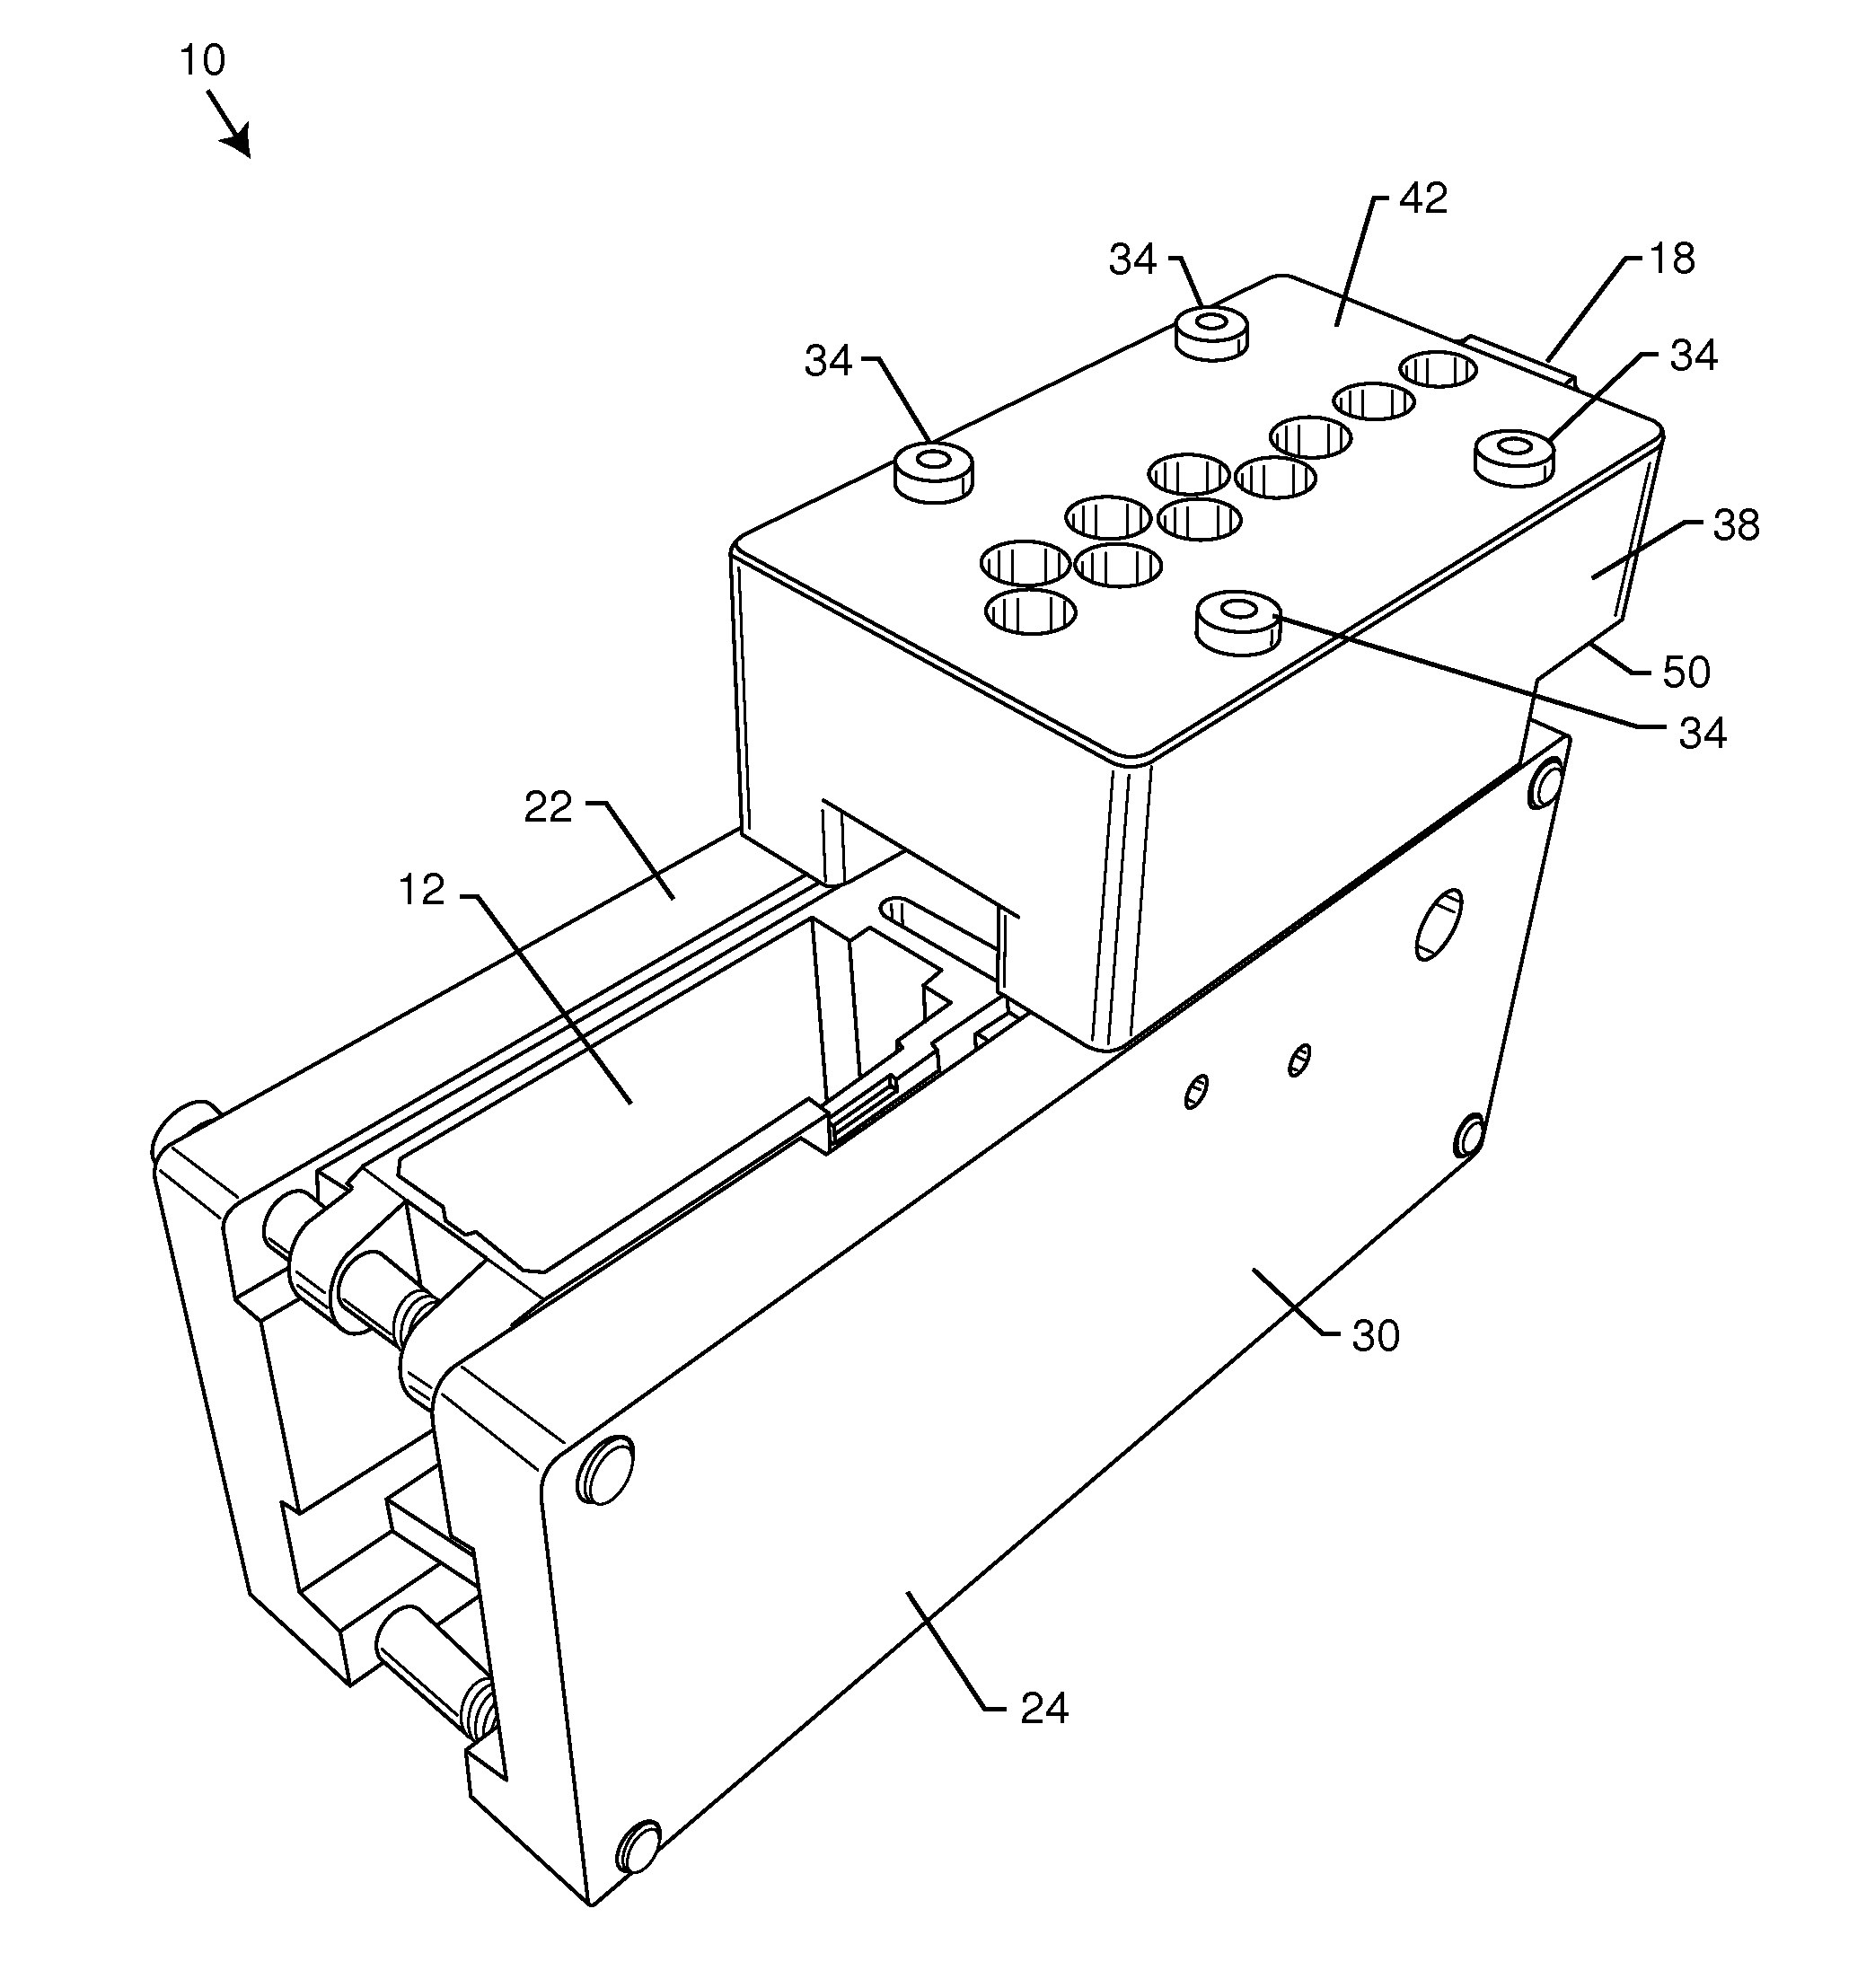 Jig for firearm lower receiver manufacture